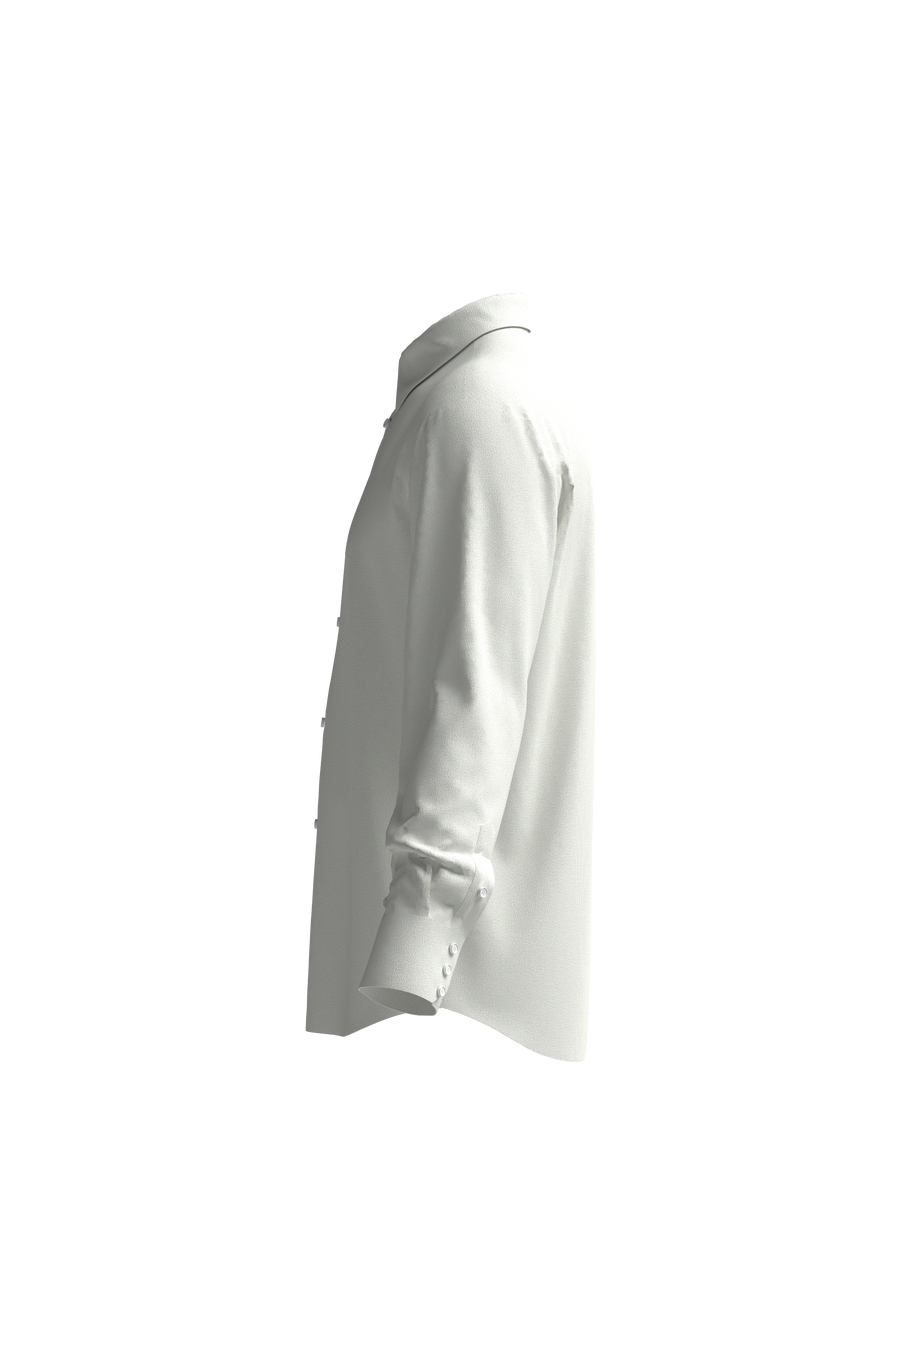 White Men's Shirt with Roman Collar and Napoleonic Cuffs